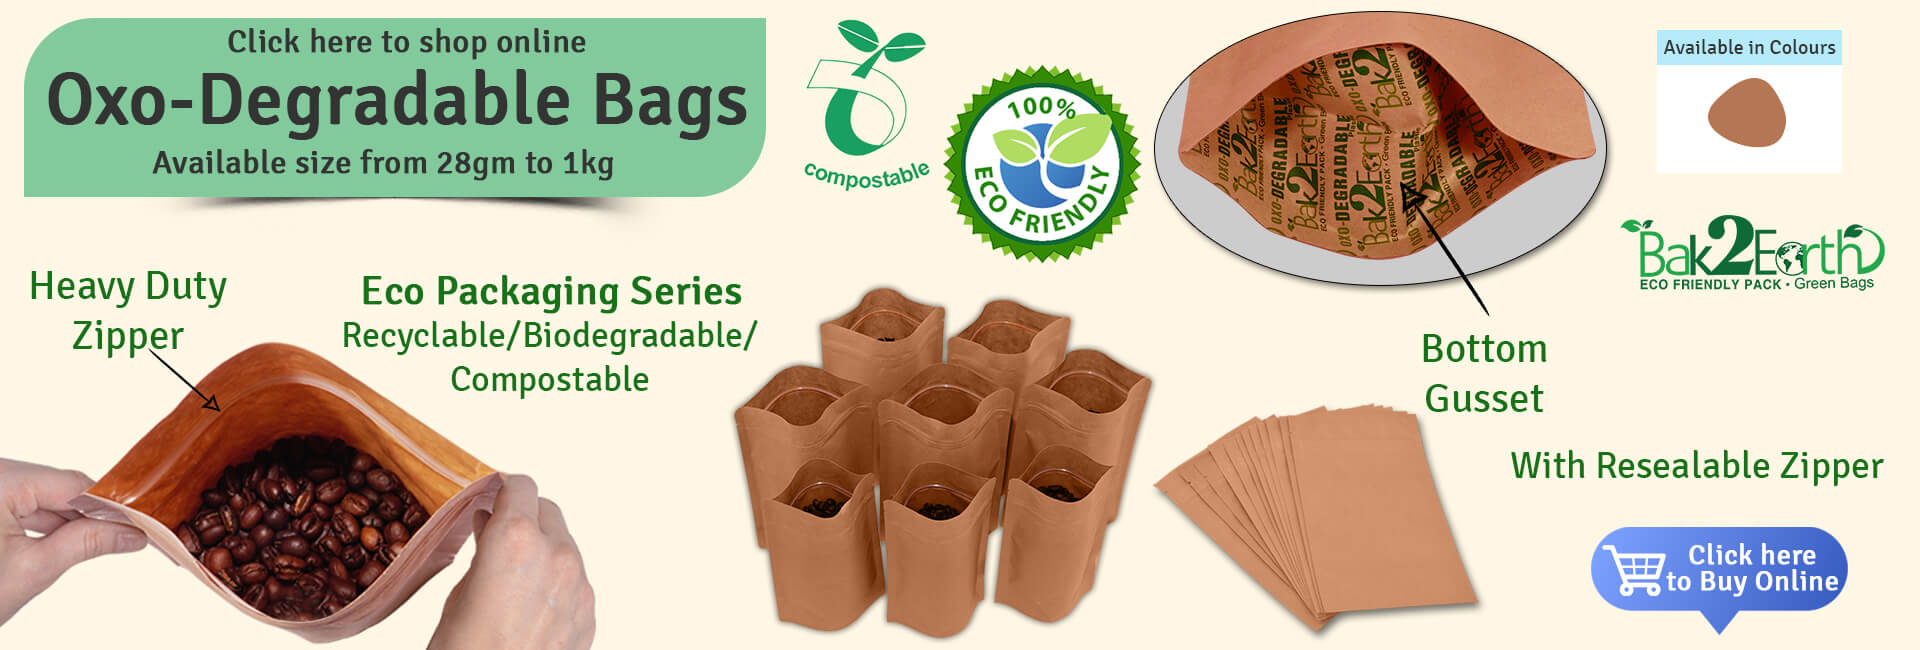 Oxo Degradable Bags PouchMakers